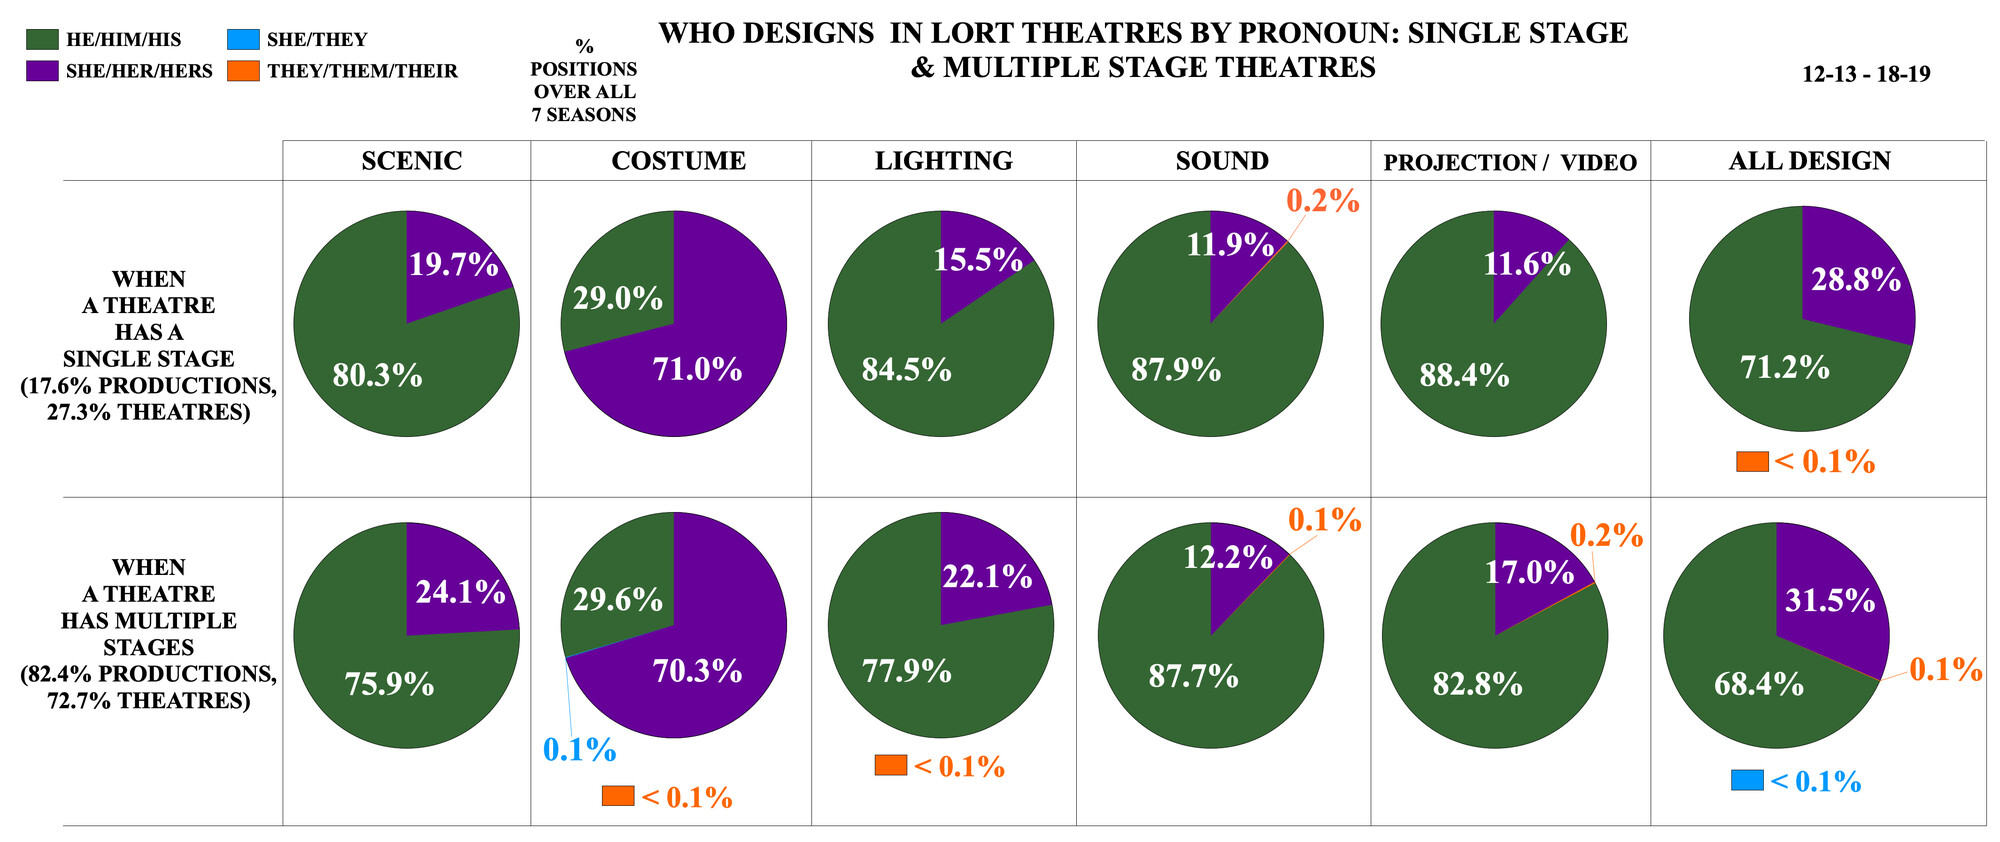 Who Designs in LORT Theatres by Pronoun: Single Stage & Multiple Stage Theatres